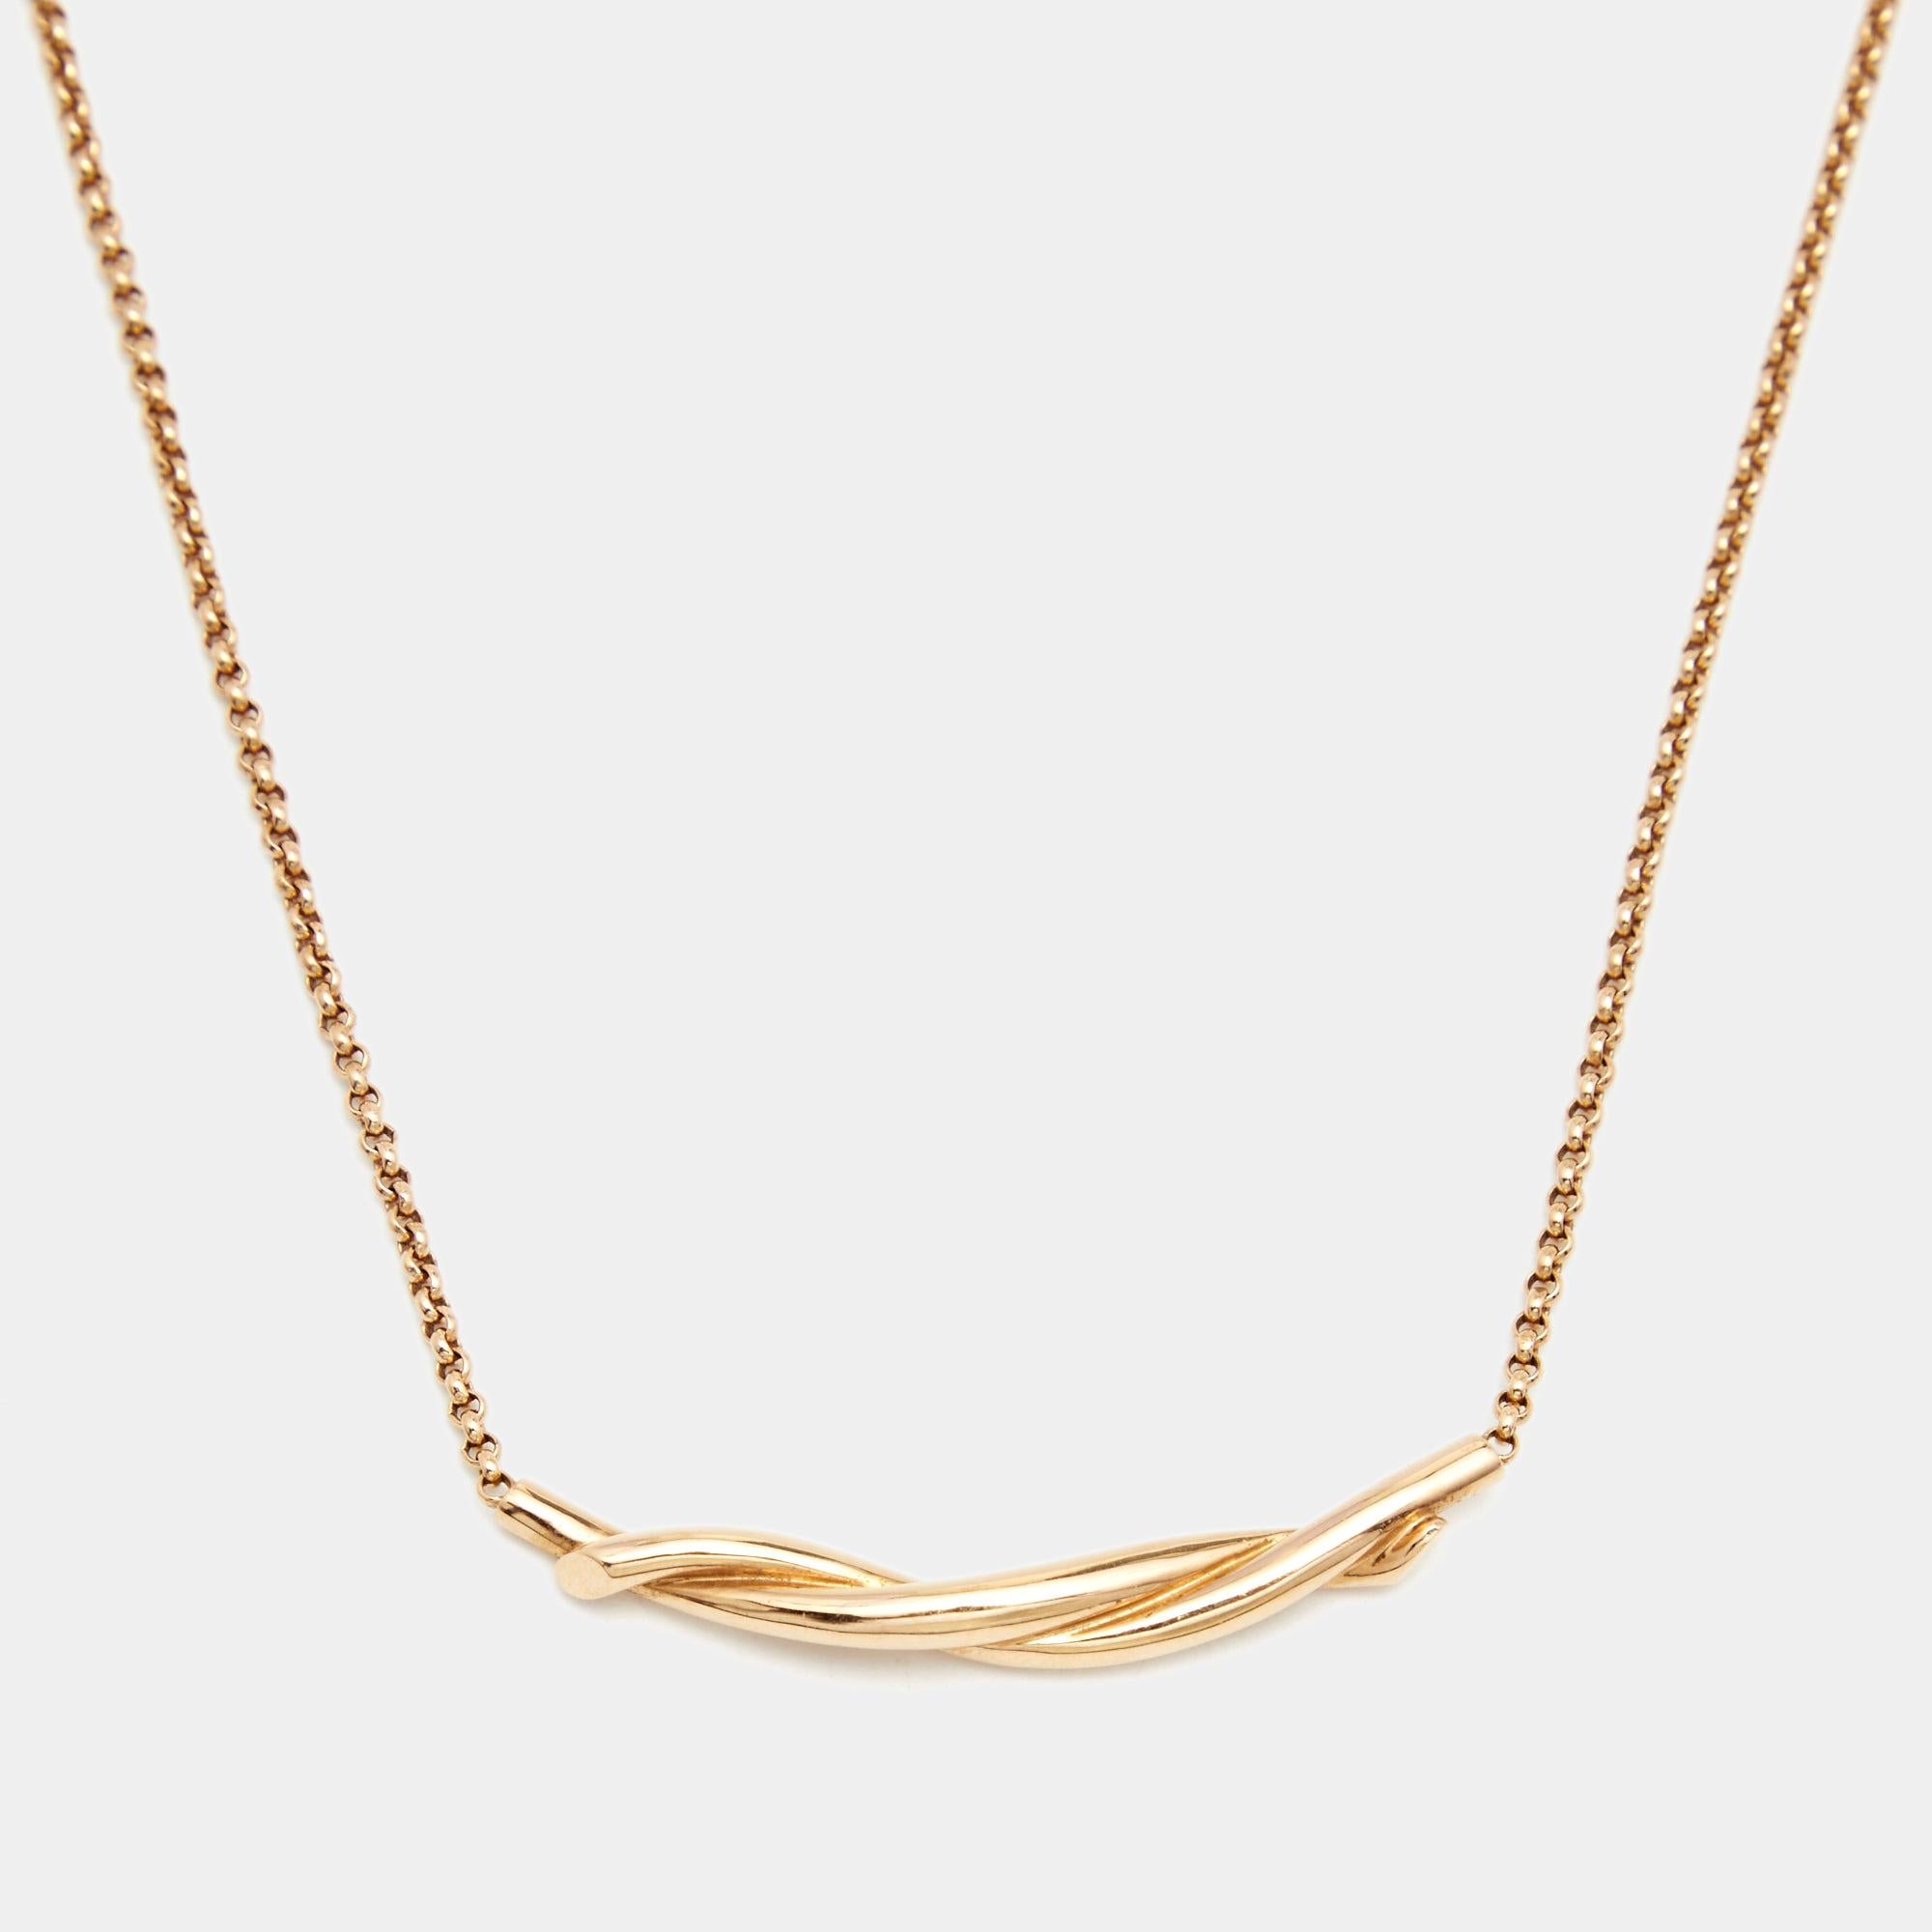 Two slim bars are gently twisted together like an unbreakable bond for this Cartier Entrelacés necklace. The fine jewelry piece is made of 18k rose gold and the wonderful pendant is held by a delicate chain.

